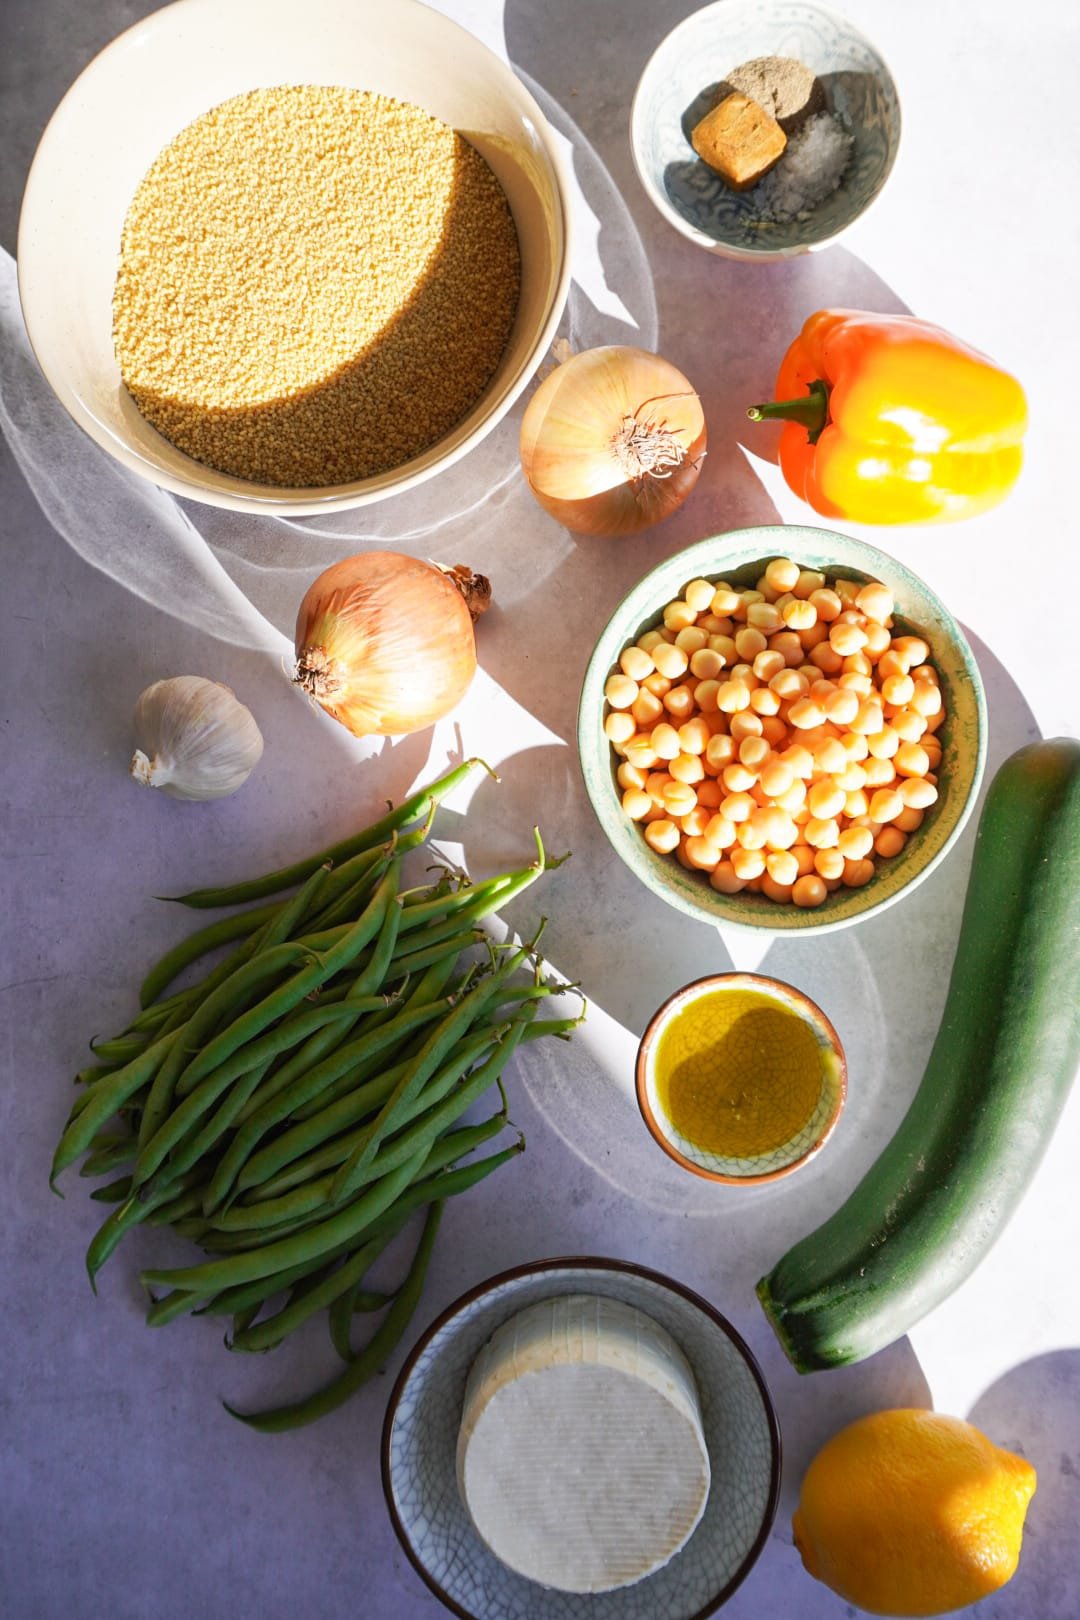 The ingredients needed for your roast vegetable couscous salad